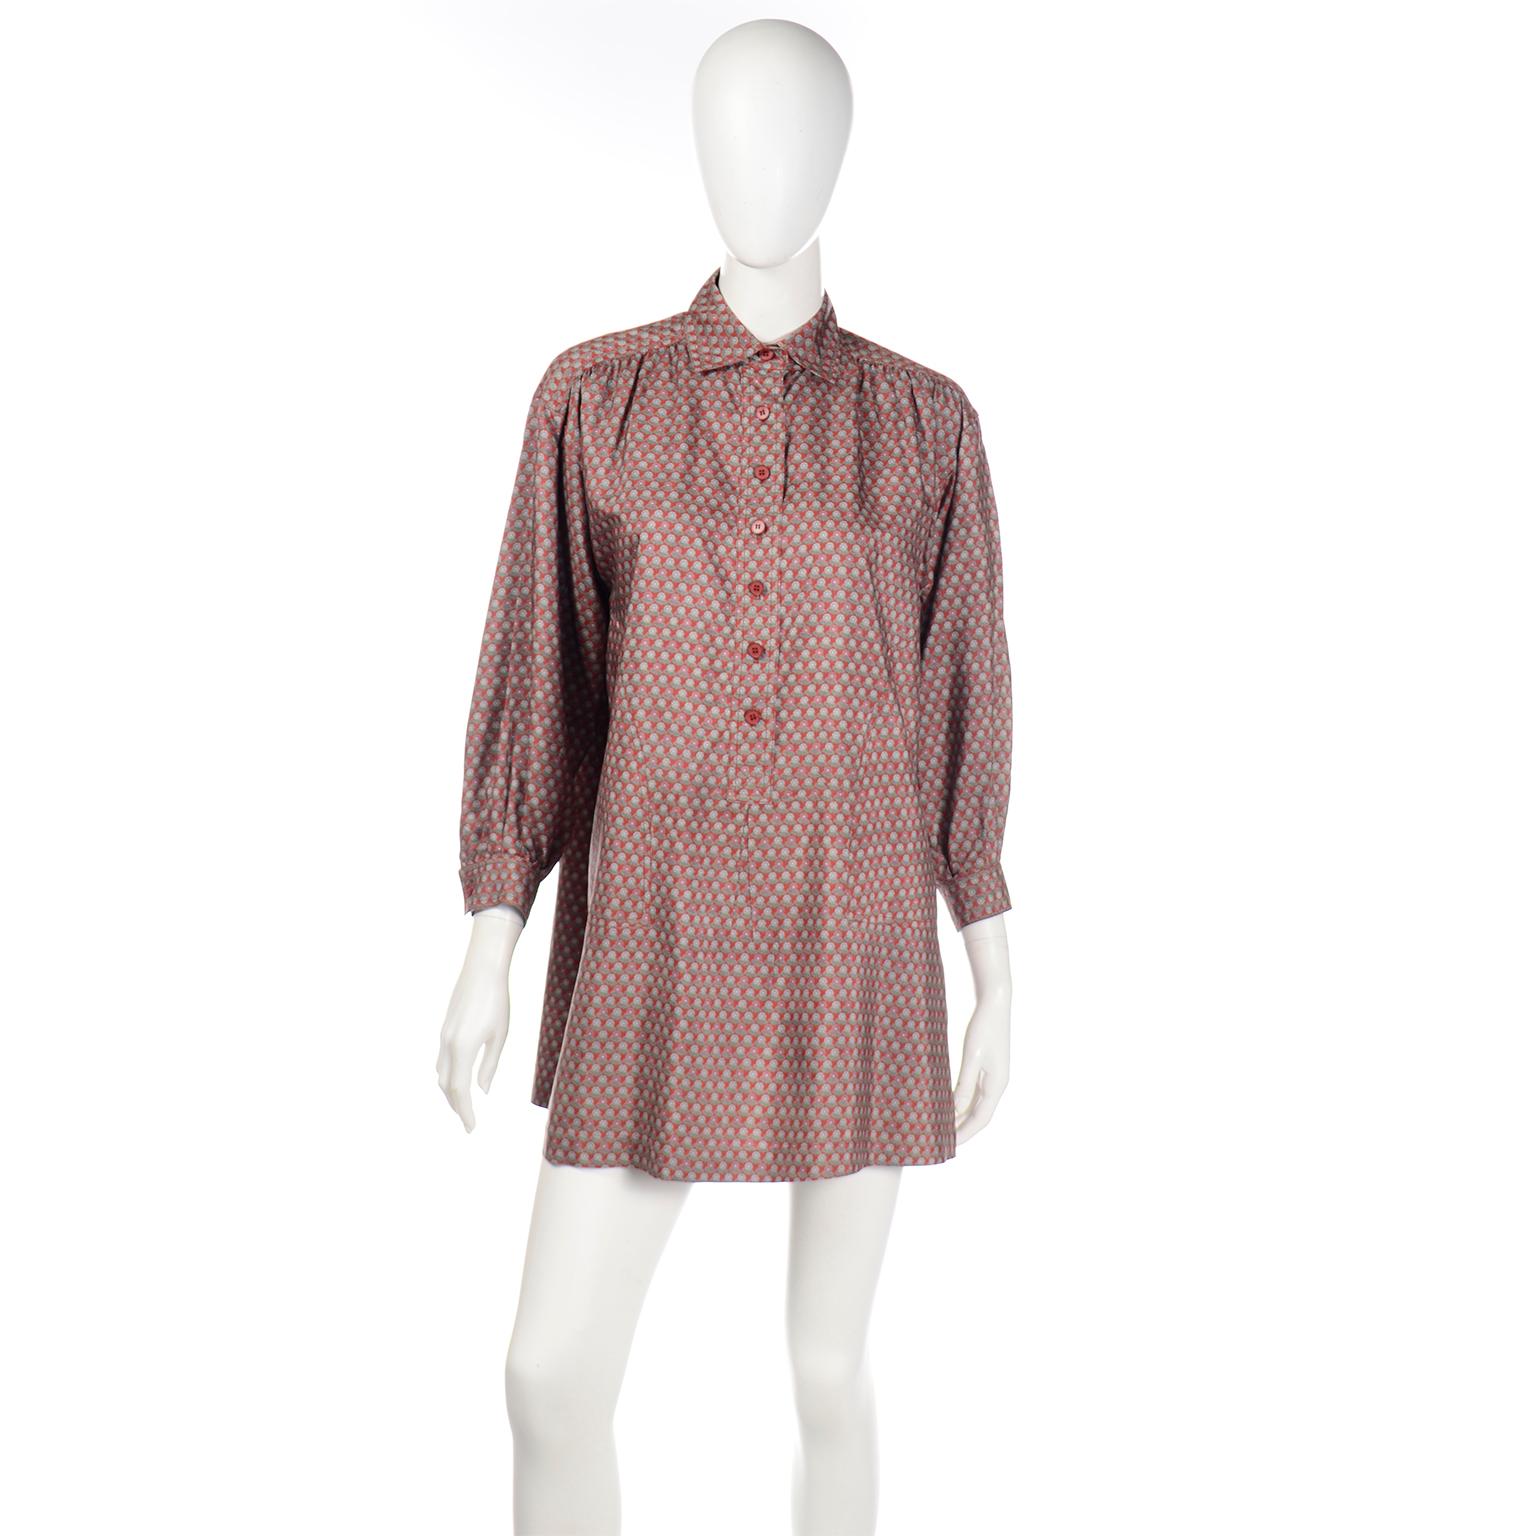 This vintage 1970's Yves Saint Laurent peasant style tunic top or mini dress has a beautiful brick red base color with faintly printed flowers throughout the fabric. The proximity of the flowers creates a slightly abstract appearance from a